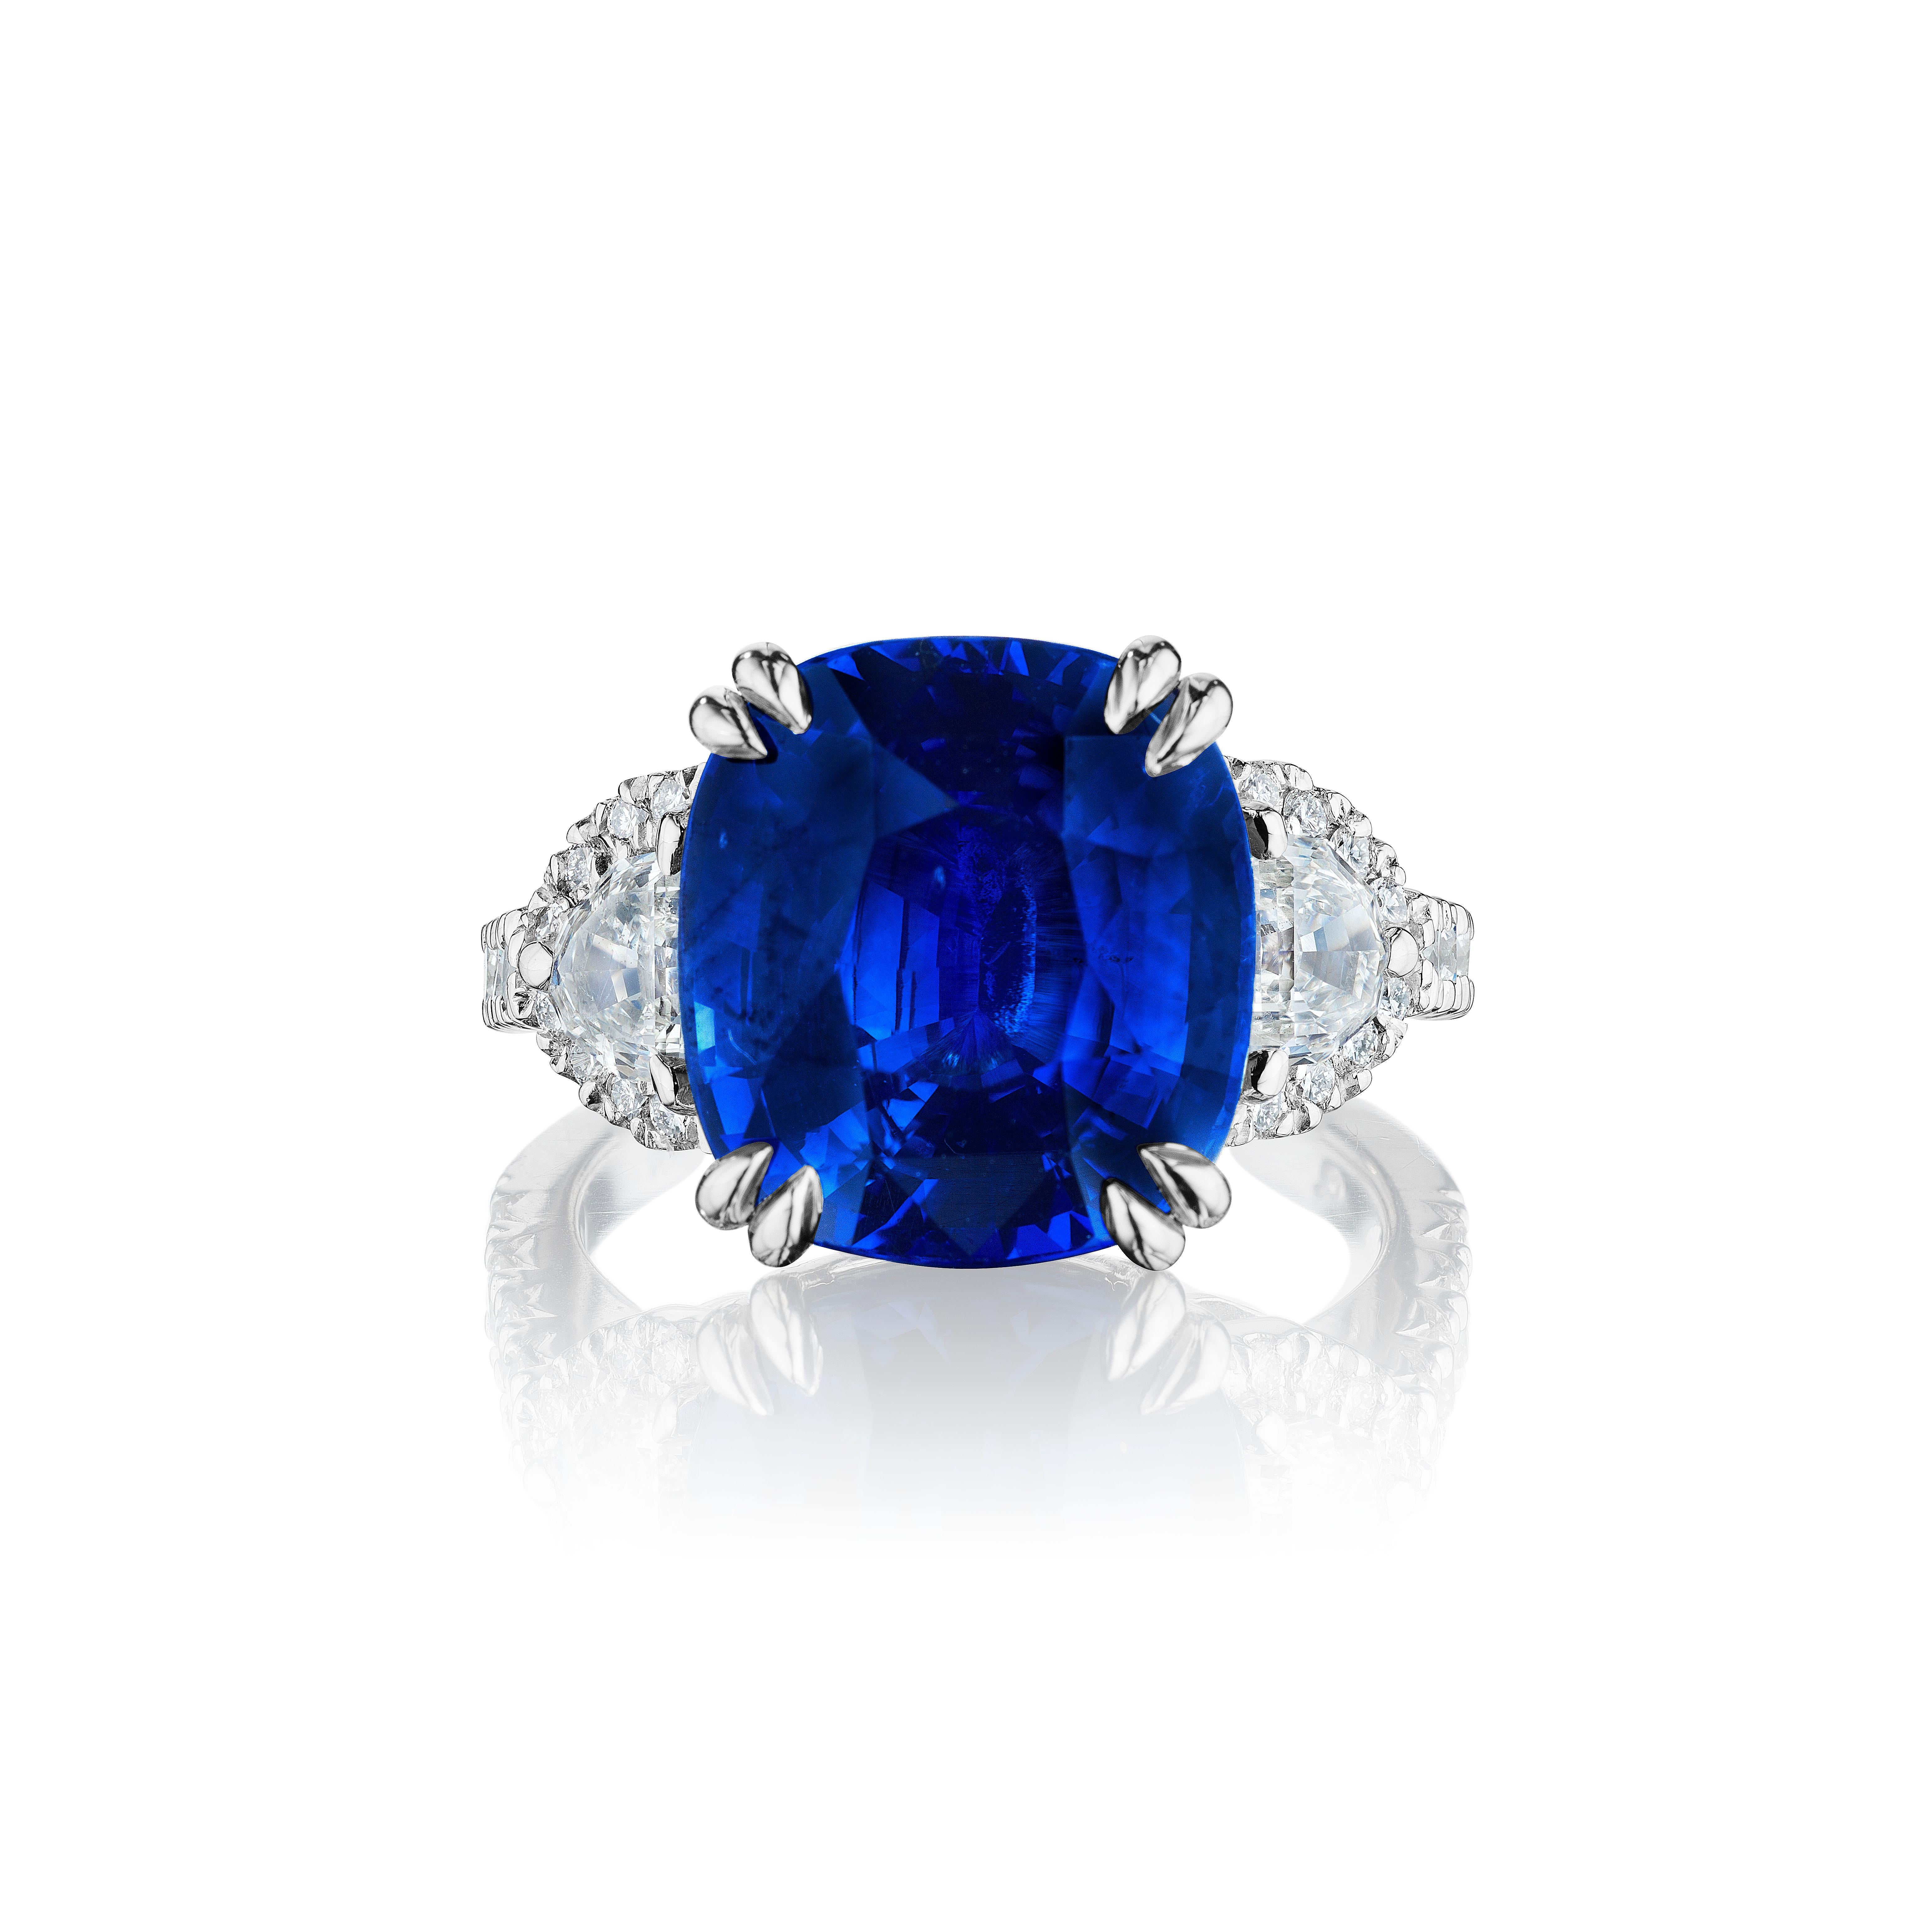 •	Platinum
•	Size 6.5
•	9.93 Carats

•	Number of Cushion Cut Sapphires: 1
•	Carat Weight: 8.86ctw
•	Color: Vivid Blue – Royal Blue
•	Certificate: GRS2020-012095

•	Number of Half moon Diamonds: 2
•	Carat Weight: 0.61ctw

•	Number of Round Diamonds: